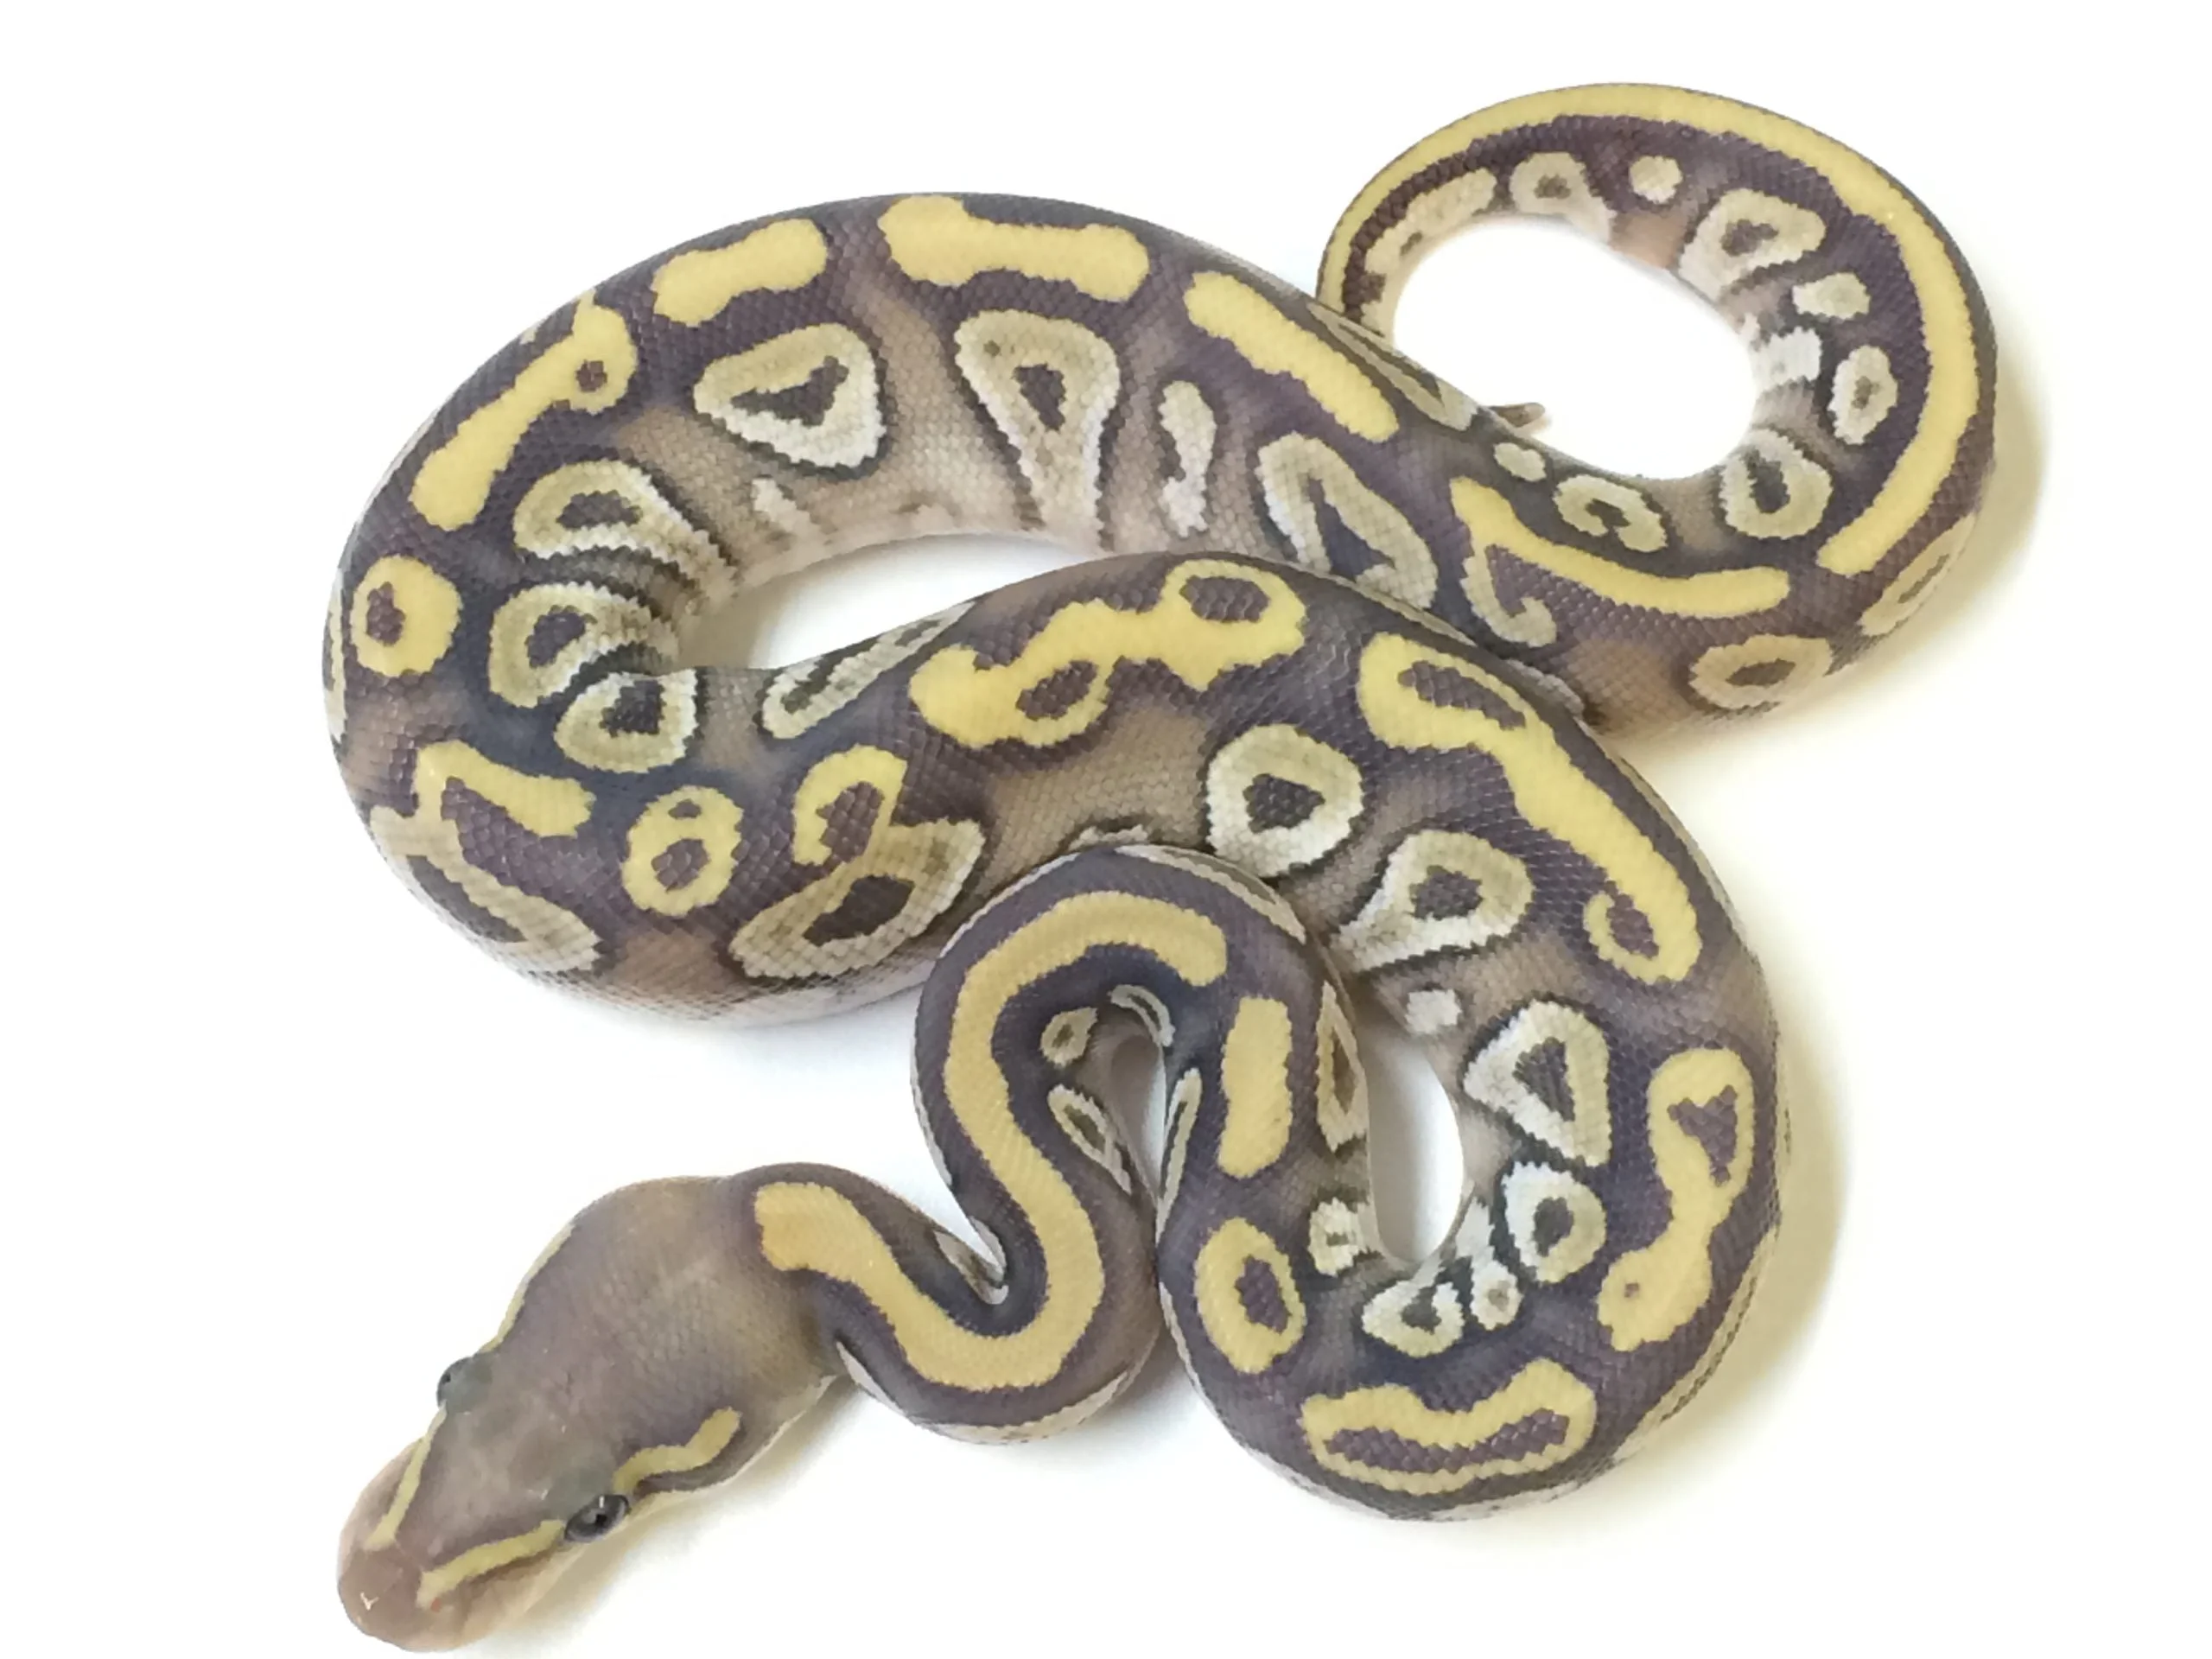 Mojave ghost ball python for sale with live arrival guarantee